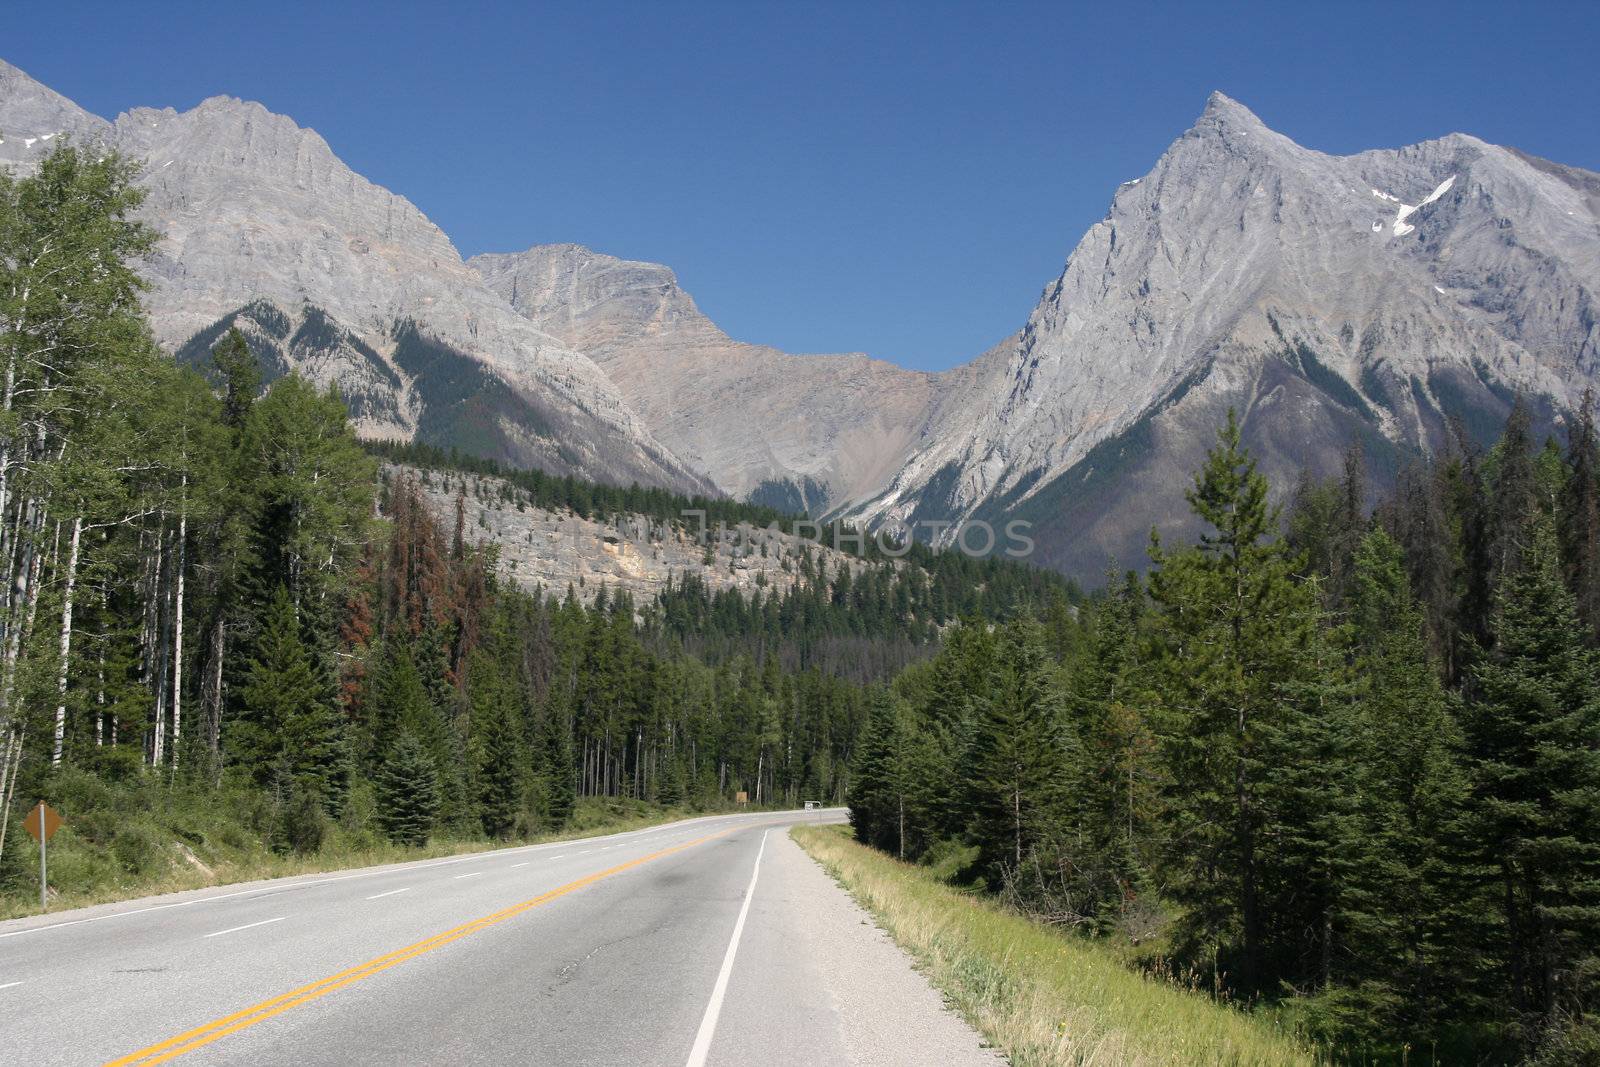 Straight scenic road in British Columbia, Canada. Rocky Mountains landscape. Yoho National Park.